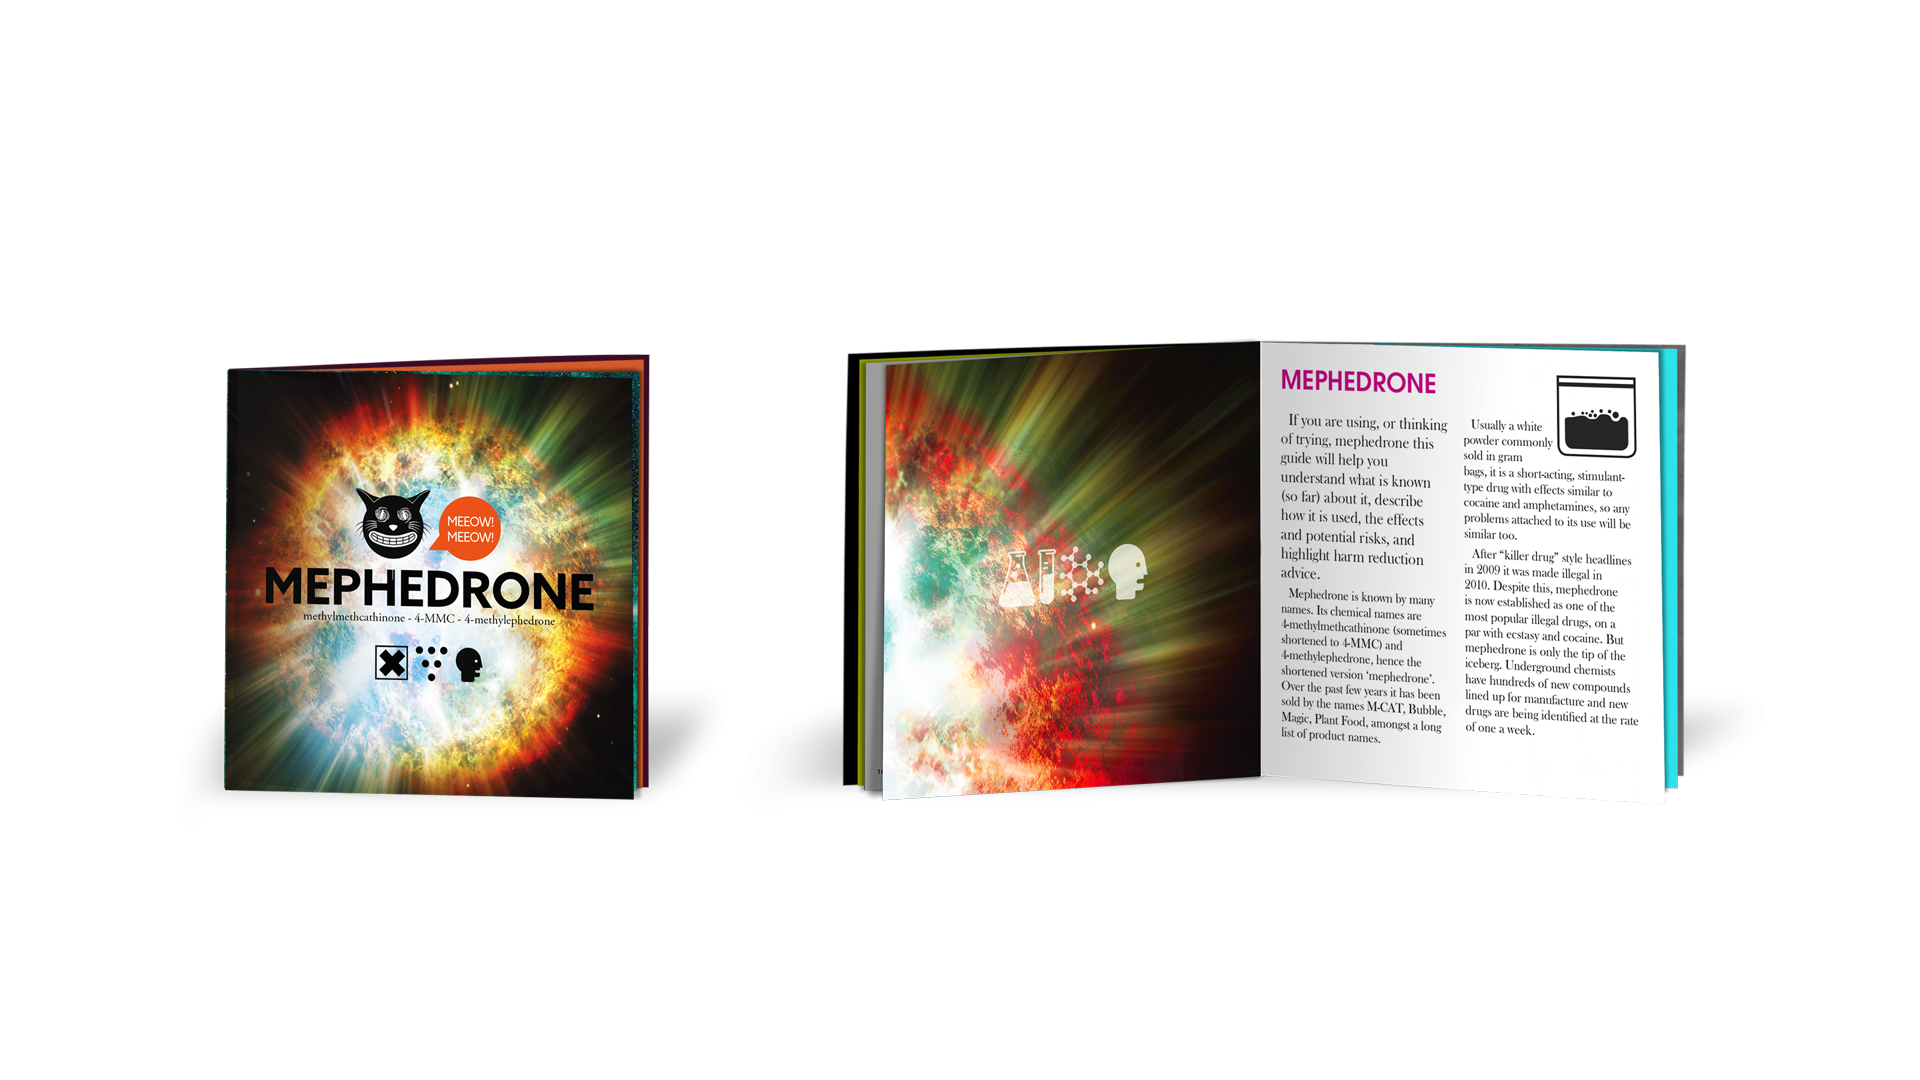 Mephedrone drug information booklet cover and inside pages